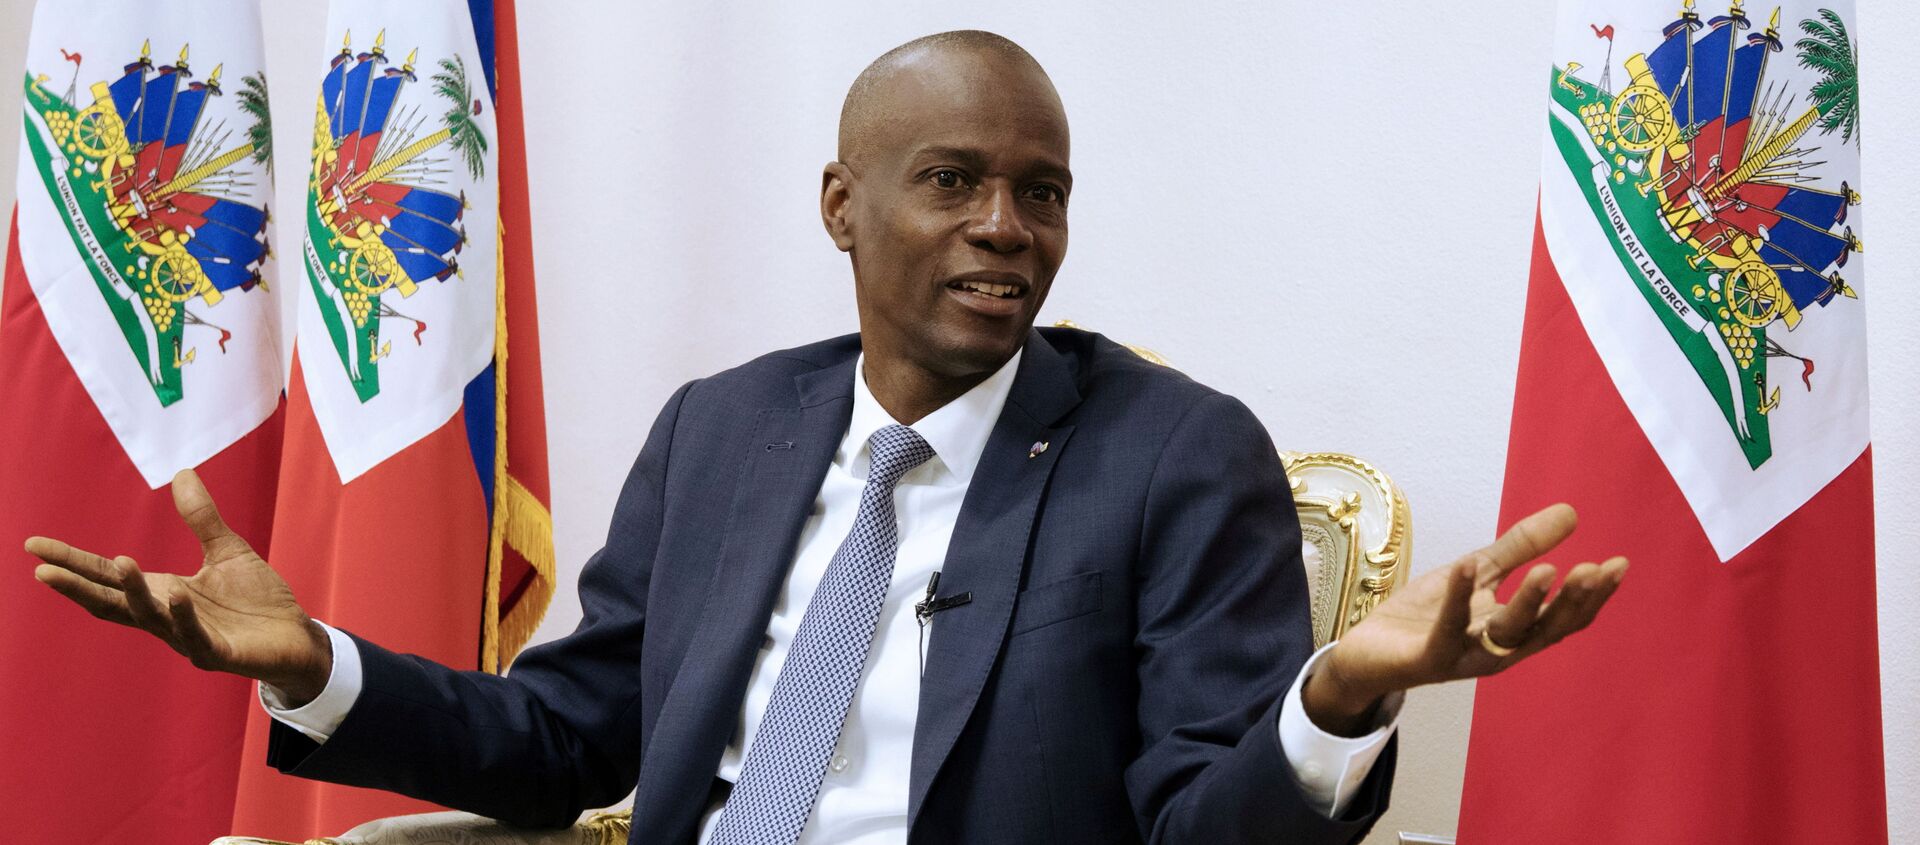 FILE PHOTO: Haiti's President Jovenel Moise speaks during an interview with Reuters at the National Palace of Port-au-Prince, Haiti January 11, 2020. REUTERS/Valerie Baeriswyl/File Photo - Sputnik International, 1920, 07.07.2021